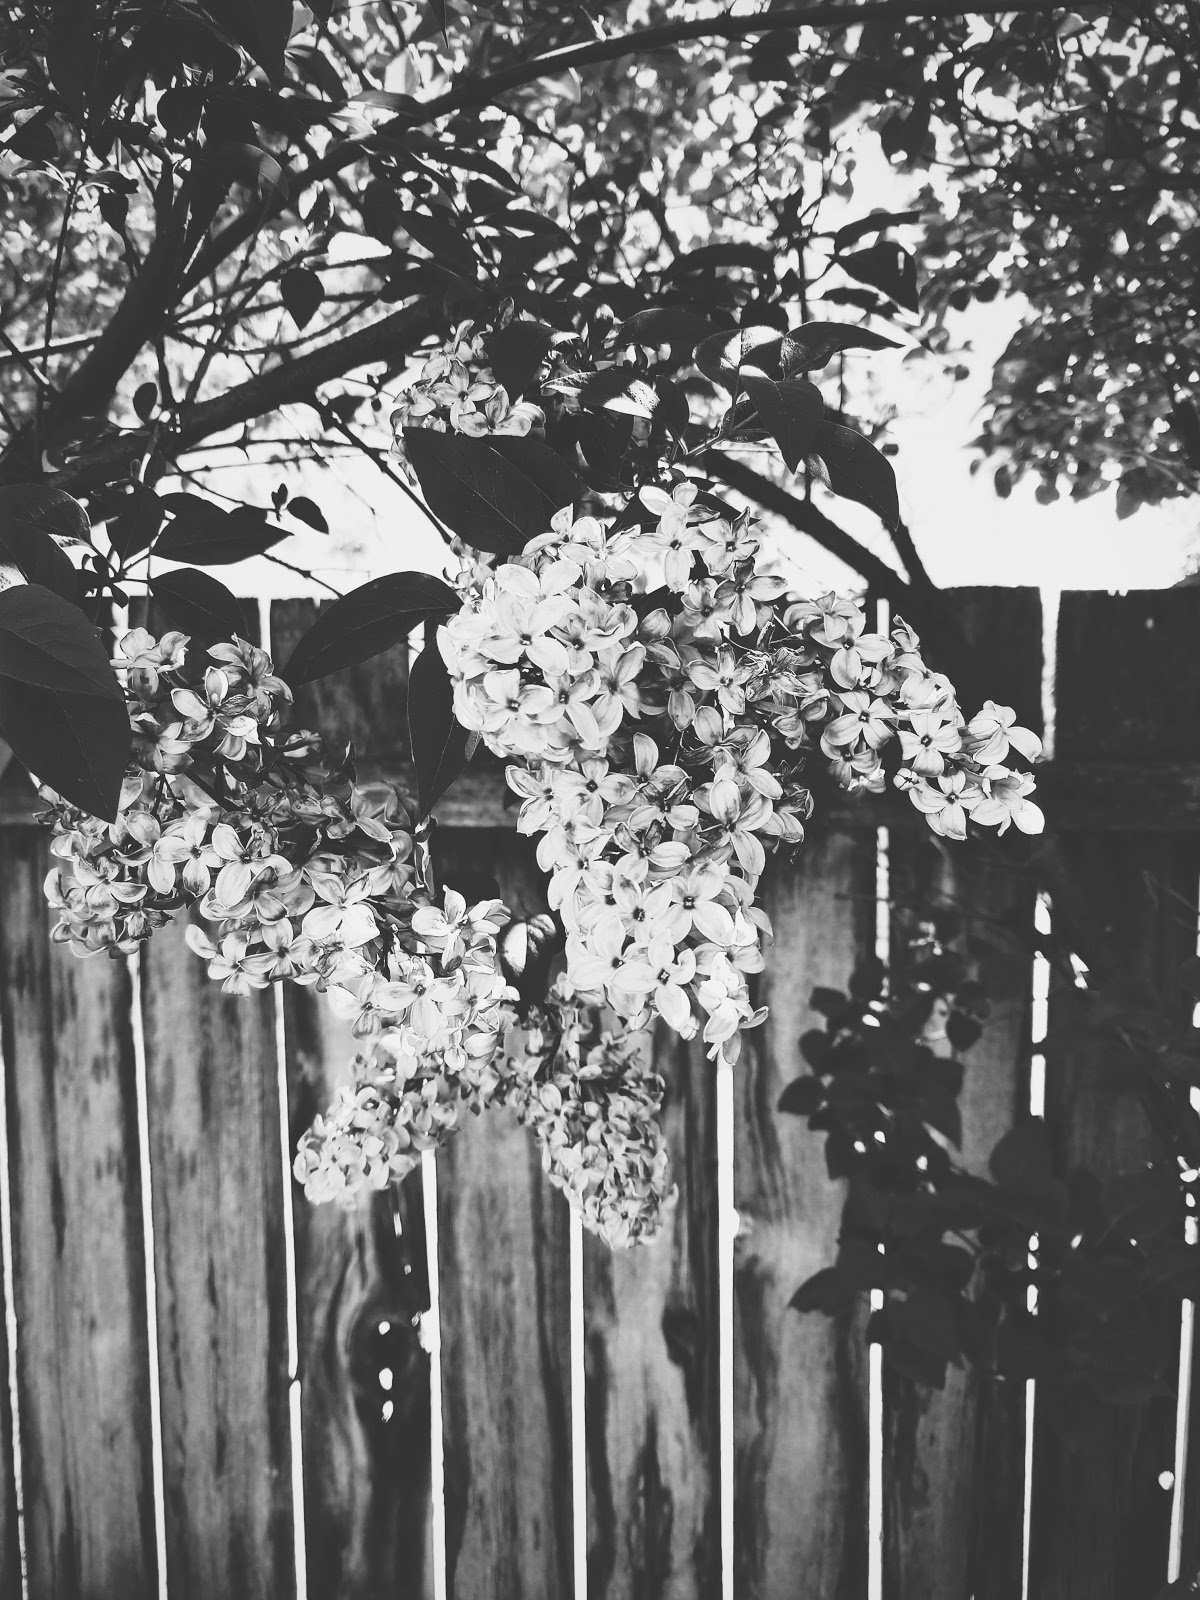 lilac blossoms // life in black & white series // www.thejoyblog.net